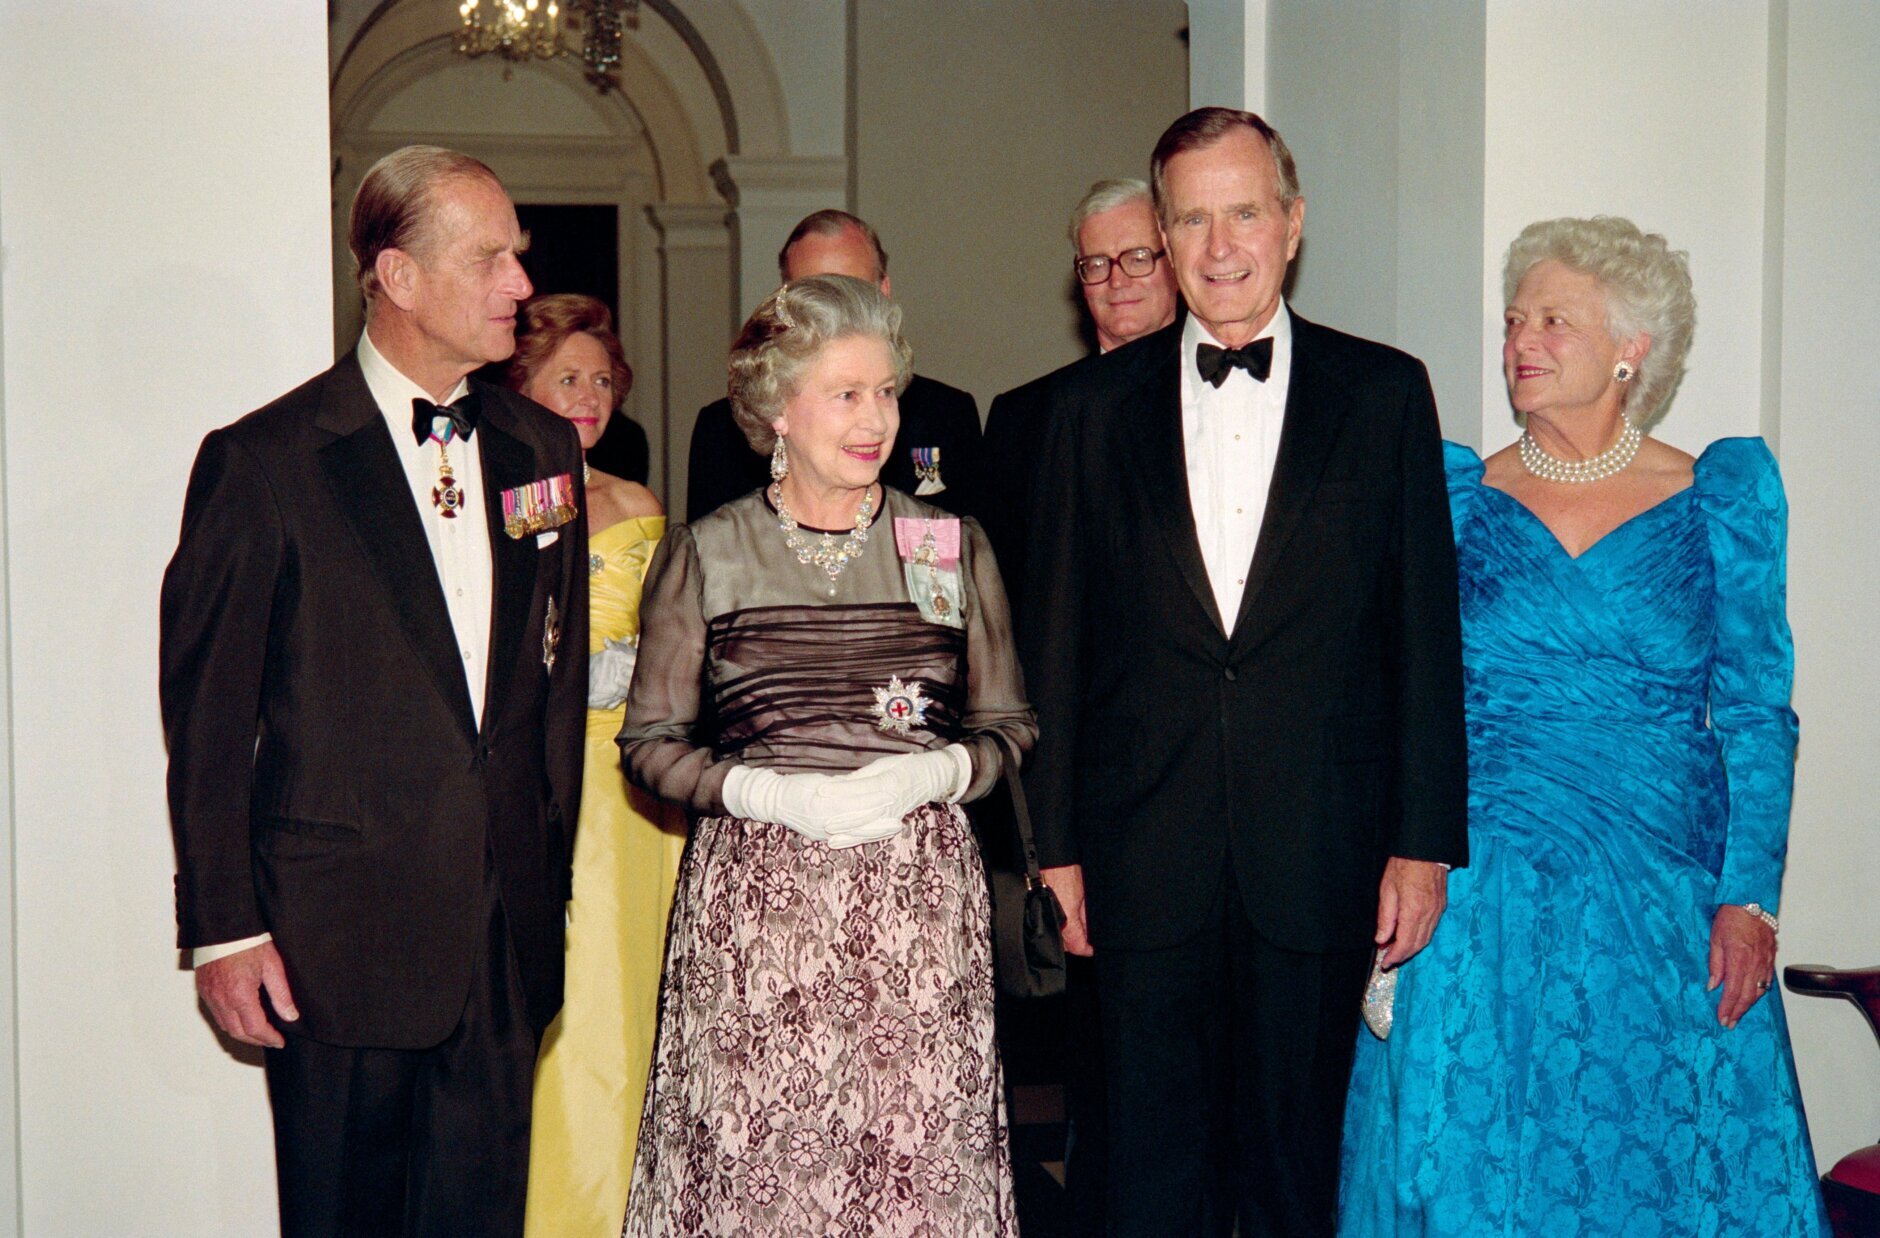 US President George Bush (2nd R) and First Lady Barbara Bush (R) arrive on May 16, 1991 at a reciprocal dinner at the British Embassy accompanied by Britain's Queen Elizabeth II (2nd L) and her husband, Prince Philip (L). Earlier the Queen addressed a joint session of the US Congress, the first British Monarch to do so.    AFP PHOTO LUKE FRAZZA (Photo by LUKE FRAZZA / AFP) (Photo by LUKE FRAZZA/AFP via Getty Images)